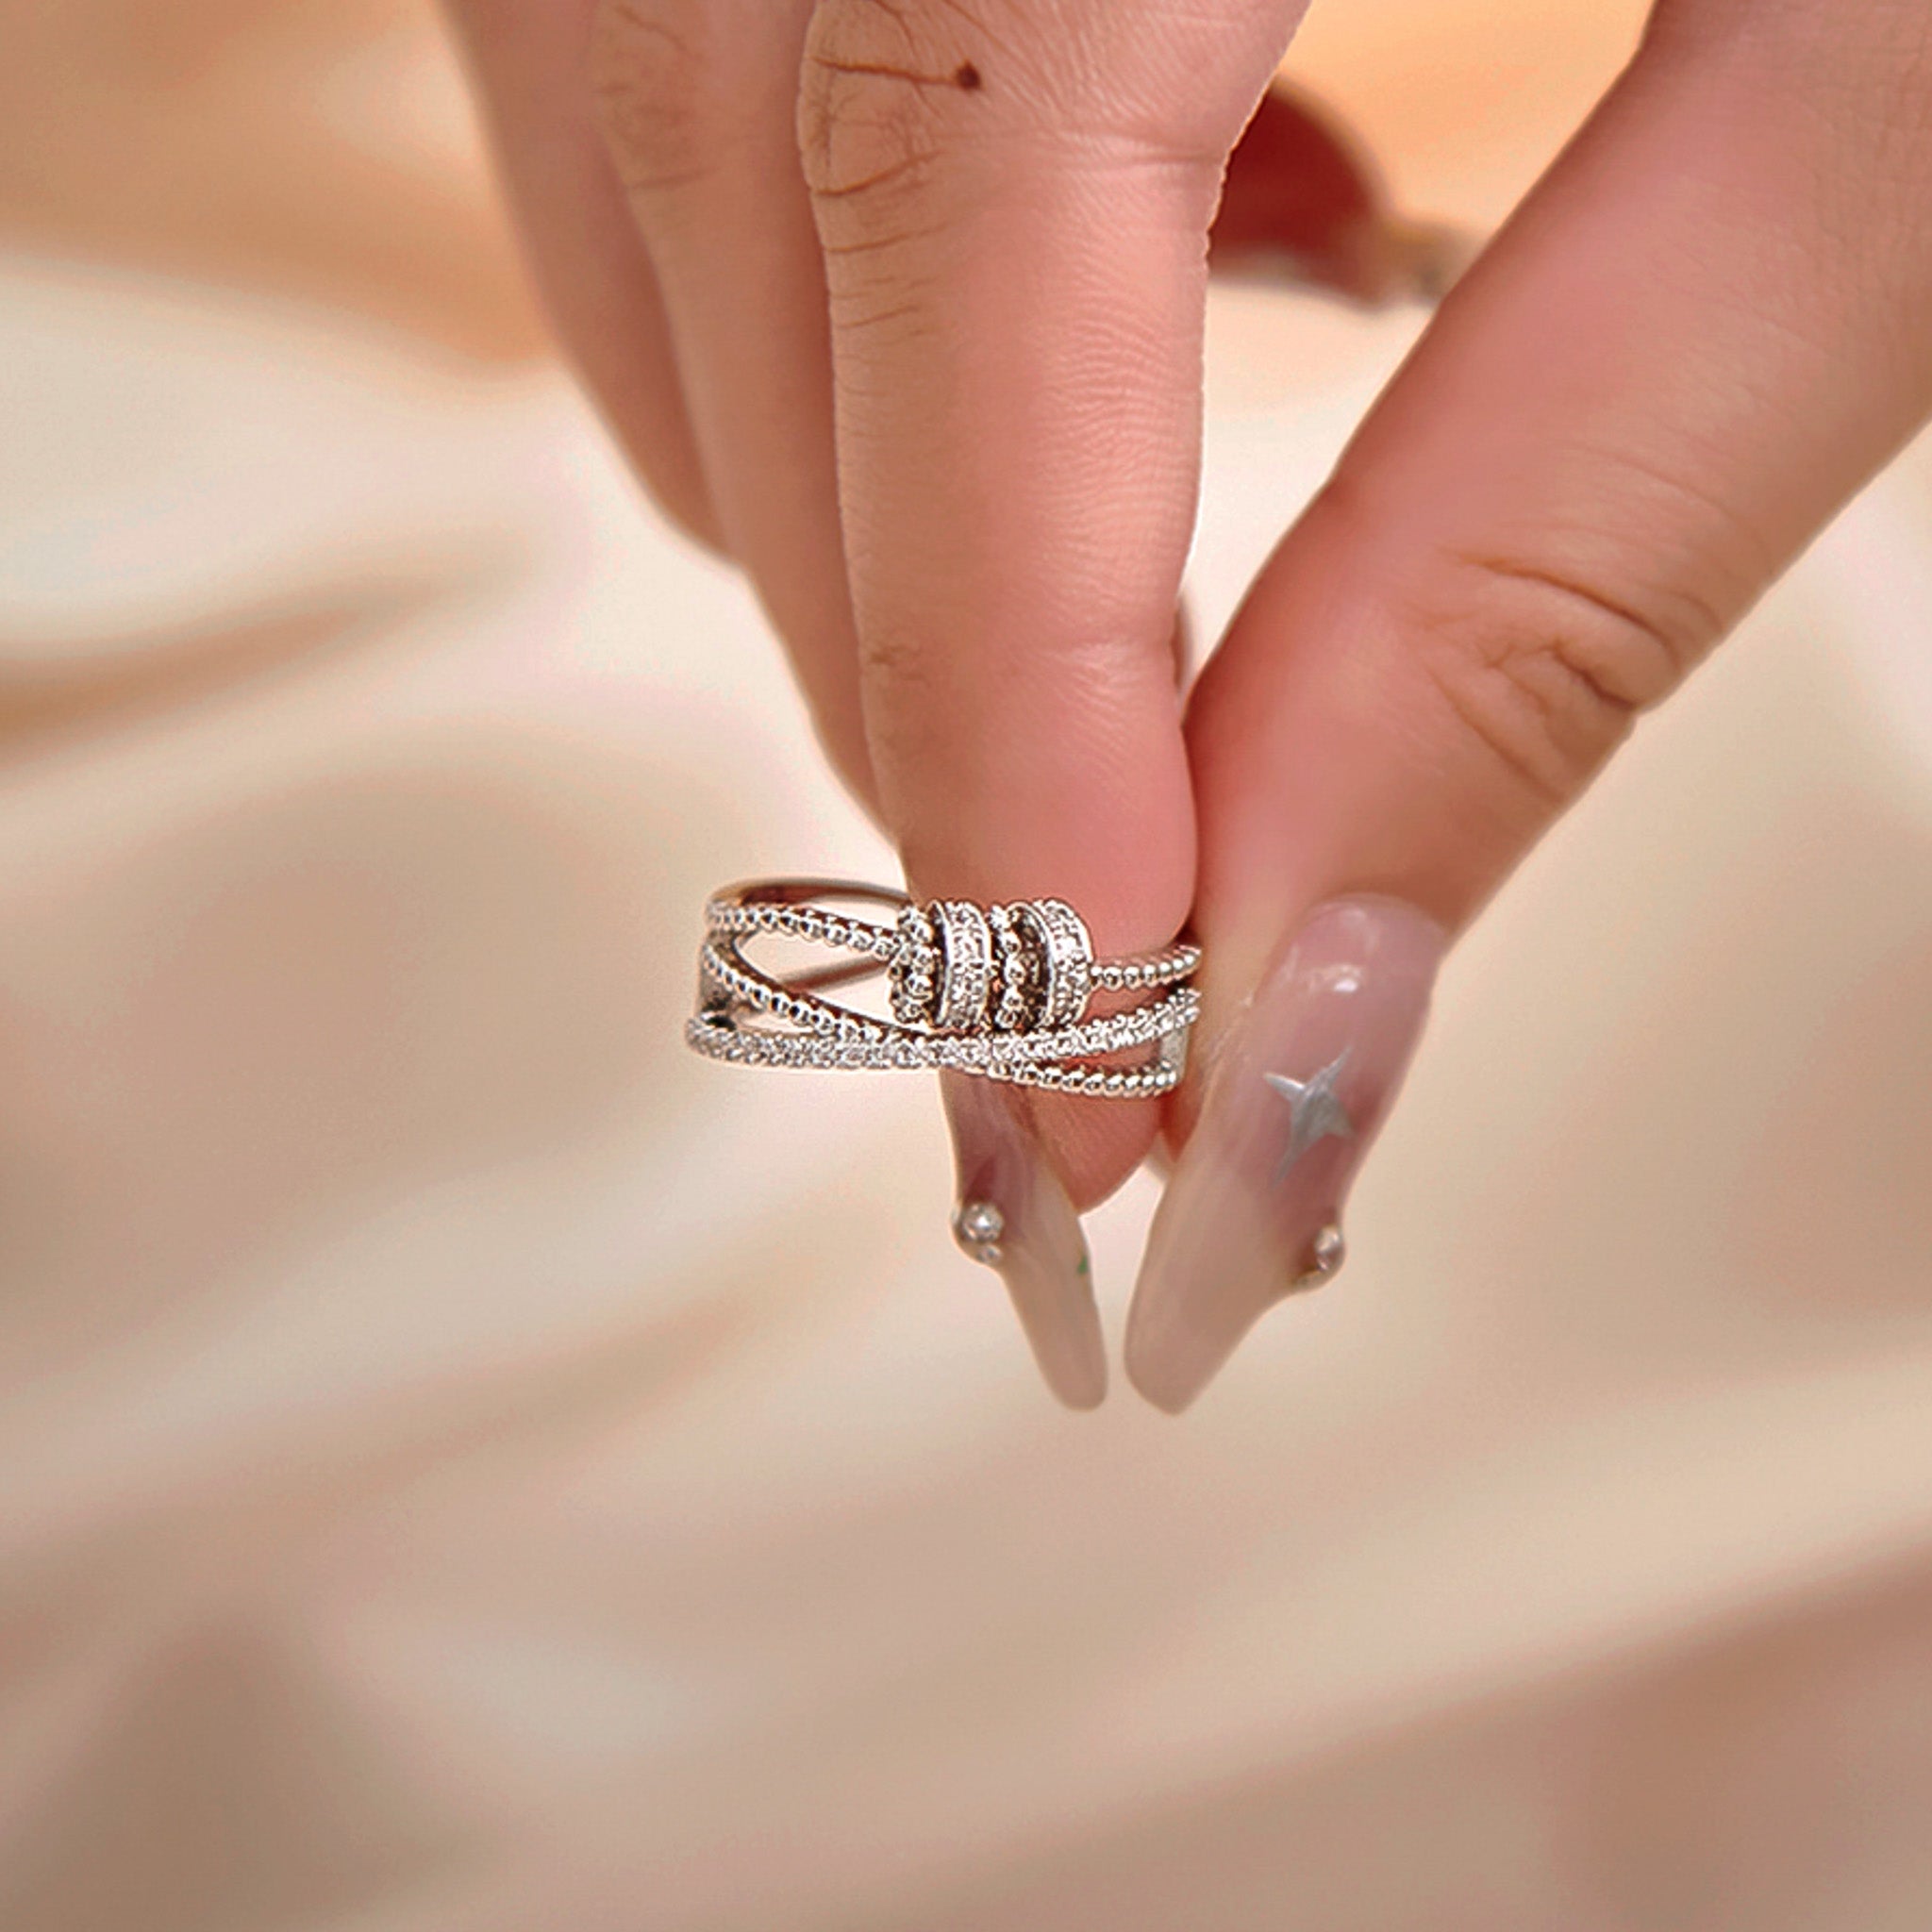 [Buy 1 Get 1 FREE] To My Daughter "Loved Beyond Measure" - Anxiety Ring Set